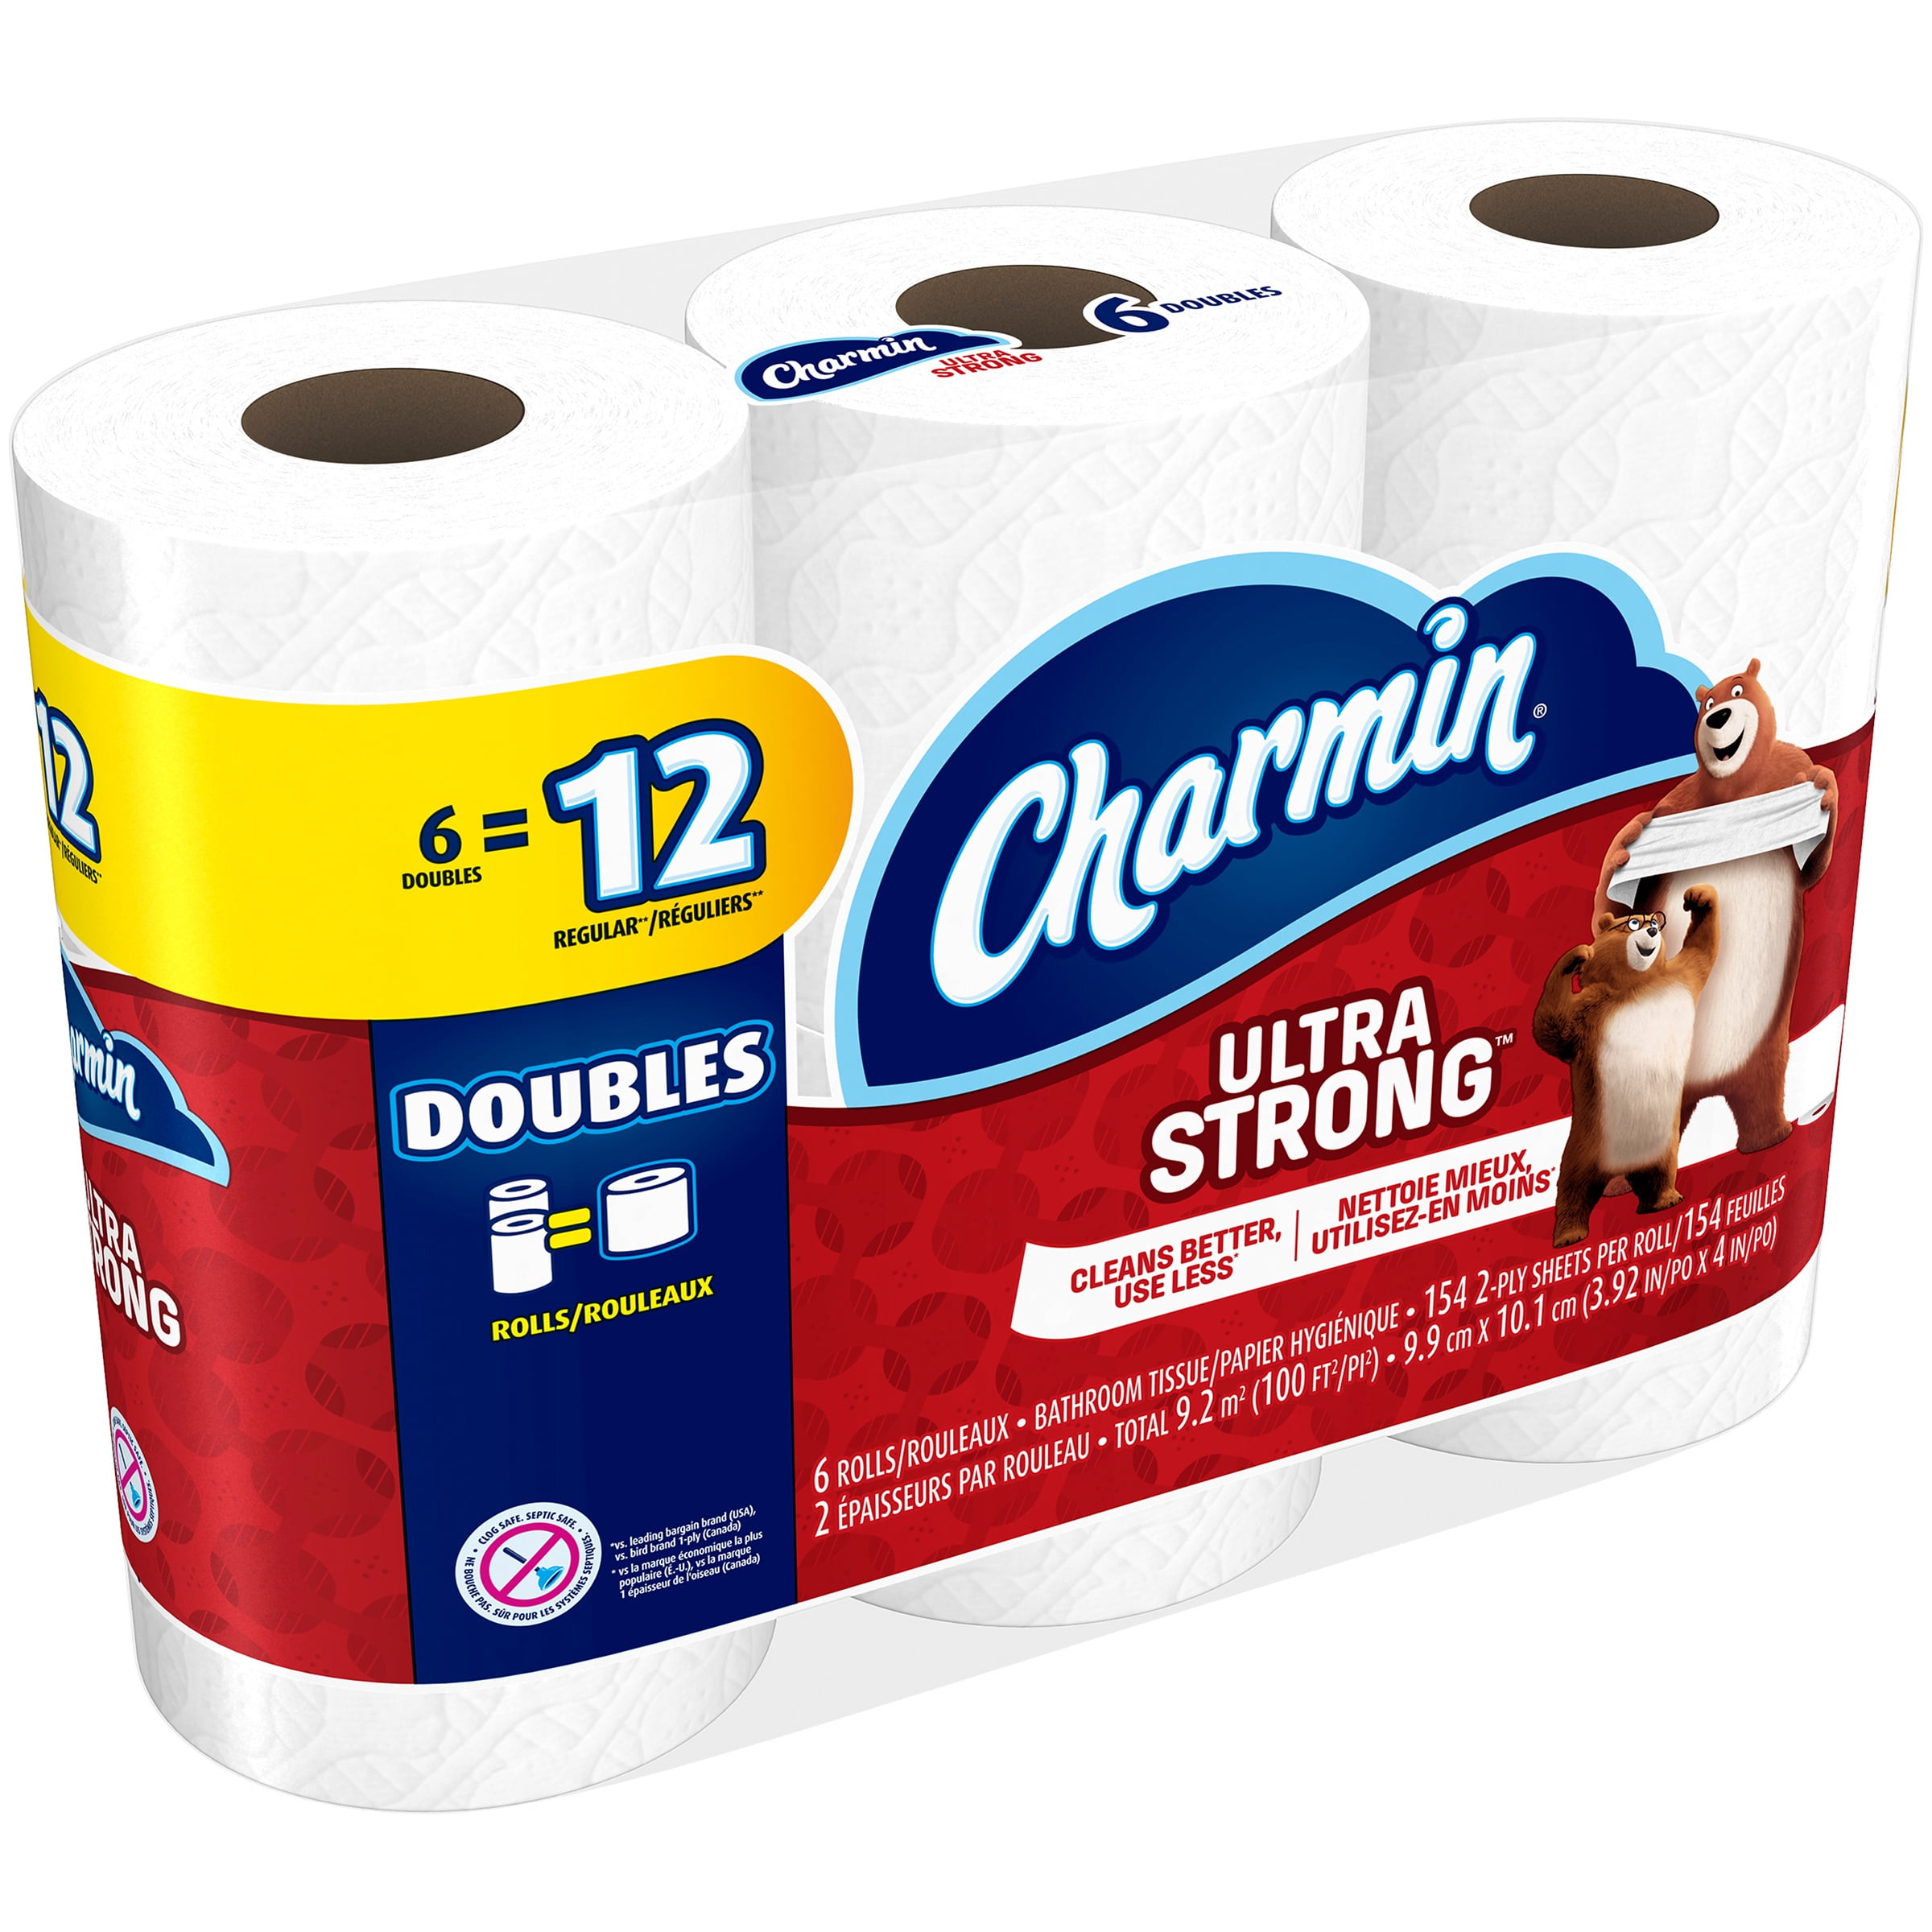 This 6 pack of toilet paper came with only 5 rolls : r/mildlyinteresting